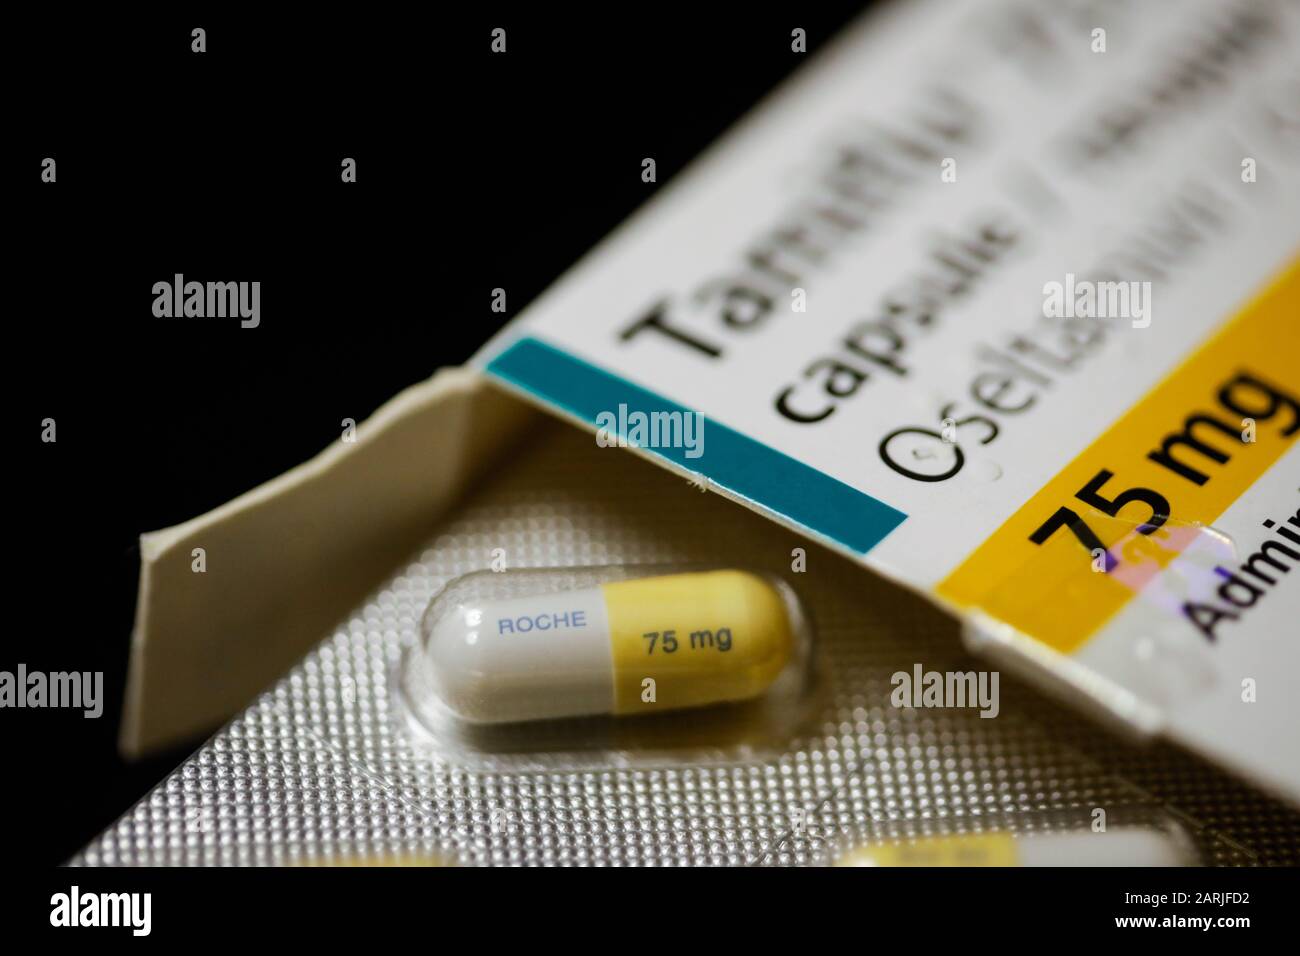 Bucharest, Romania - January 26, 2020: Close up image with a Tamiflu capsule (oseltamivir) on a blister pack, an antiviral medication that blocks the Stock Photo